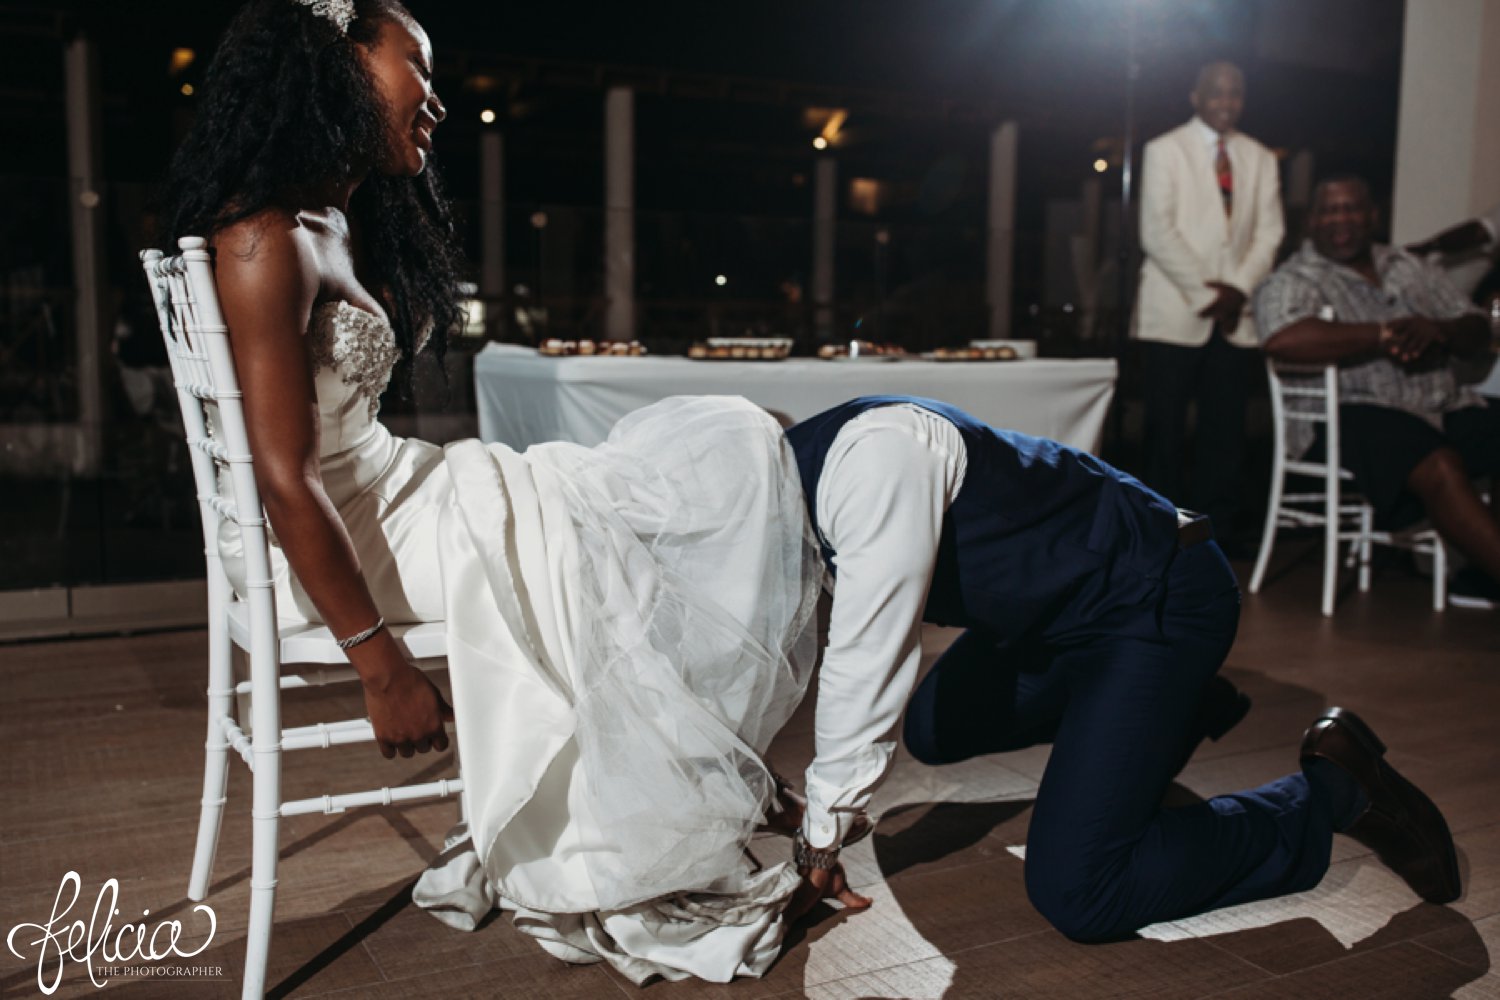   images by feliciathephotographer.com | destination wedding photographer | st lucia | l&s travel | the Royalton | reception | details | throwing the garter | white fitted gown | navy suit | 